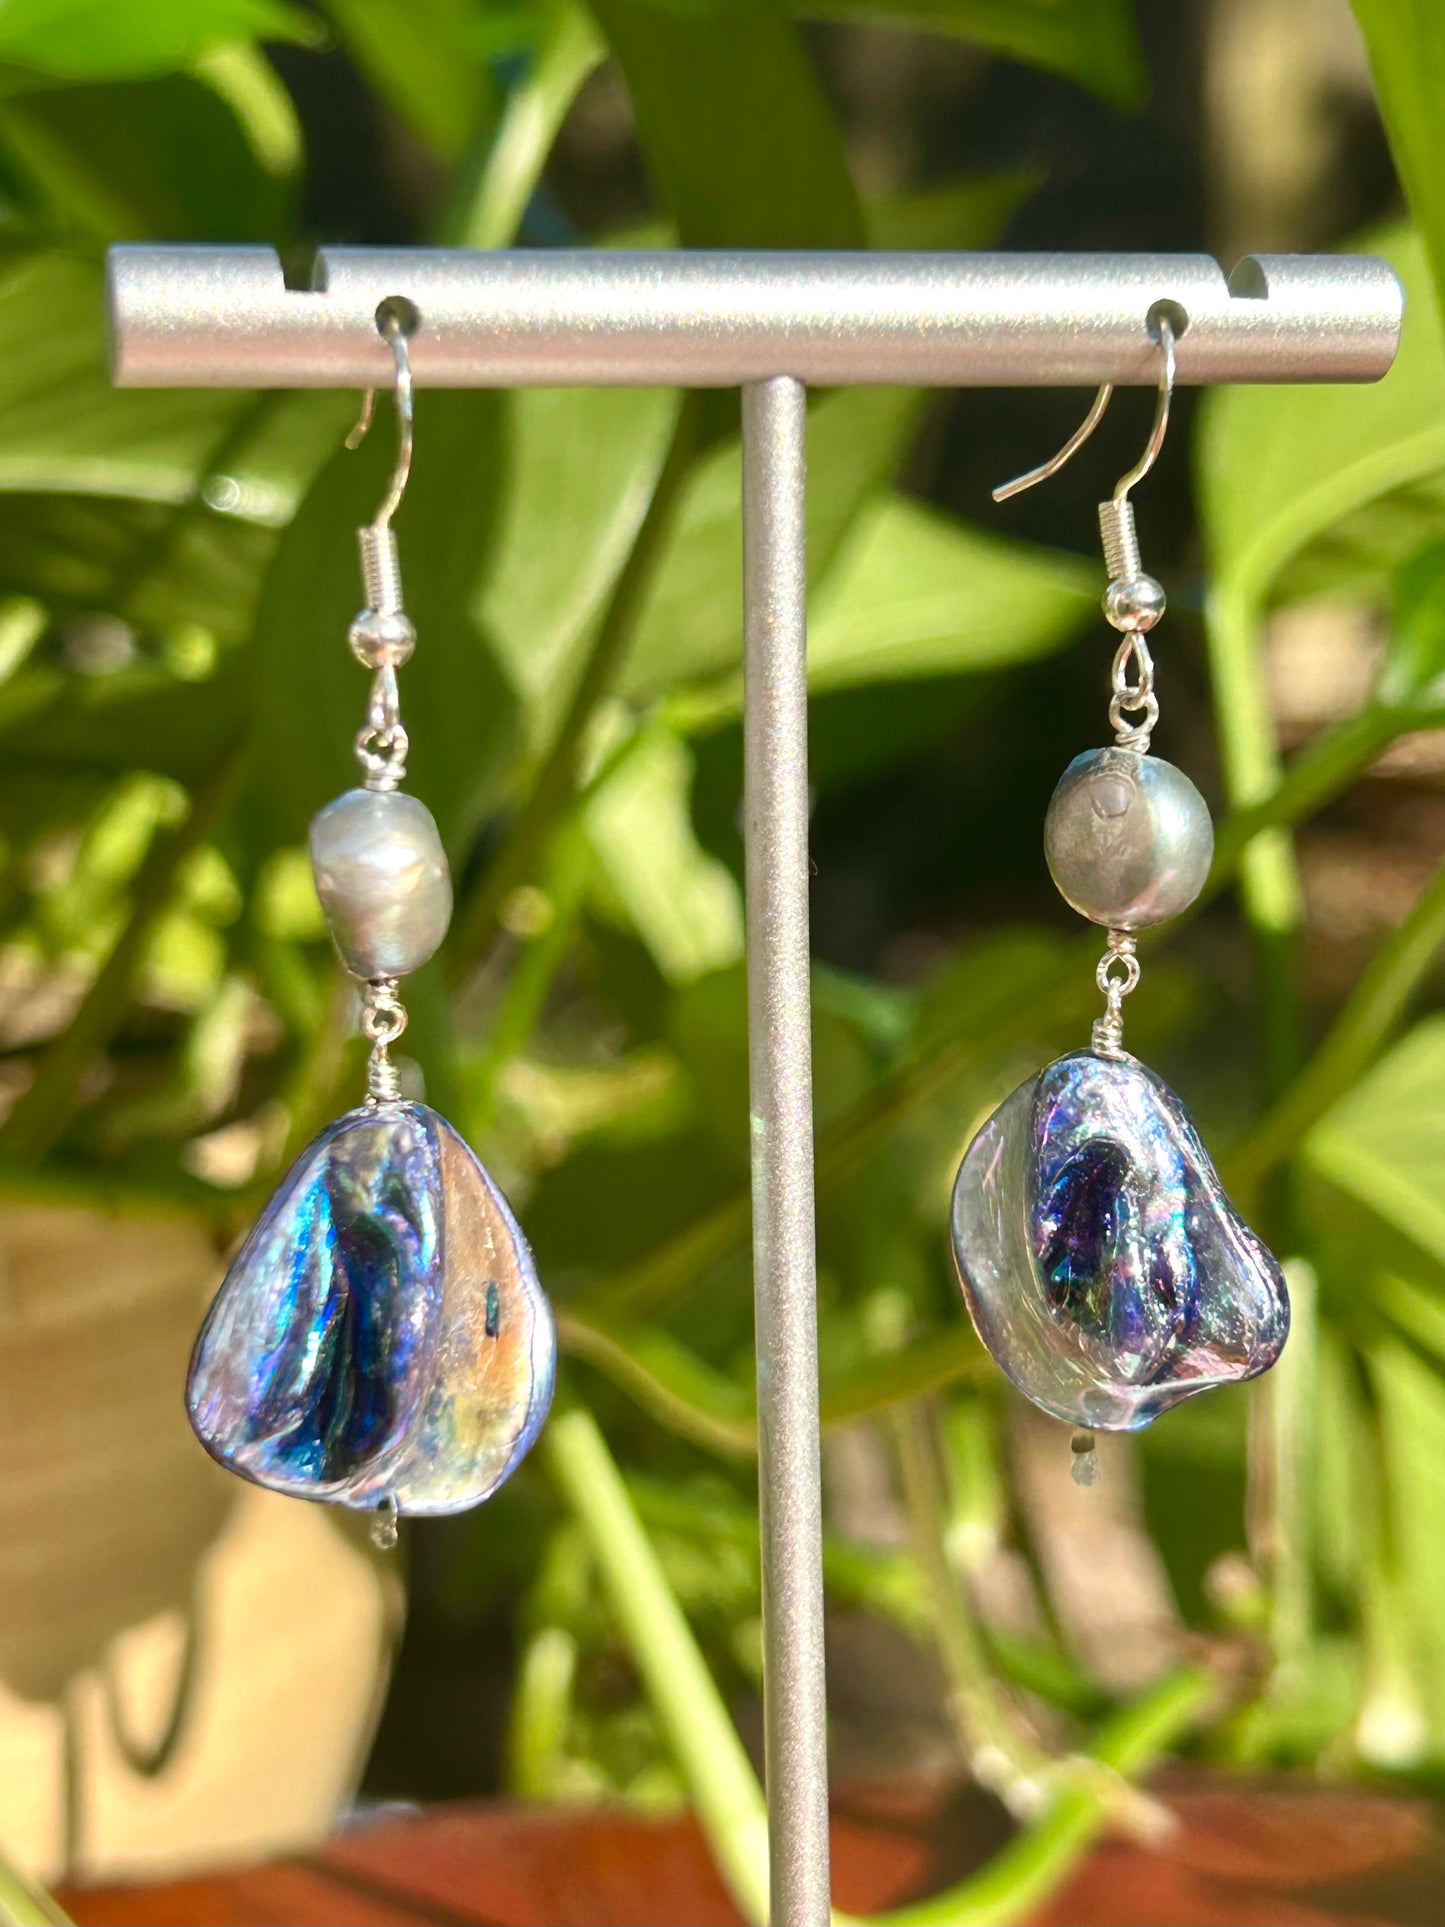 Iridescent Purple Coated Pearls & Green Pearls Sterling Silver Dangly Earrings